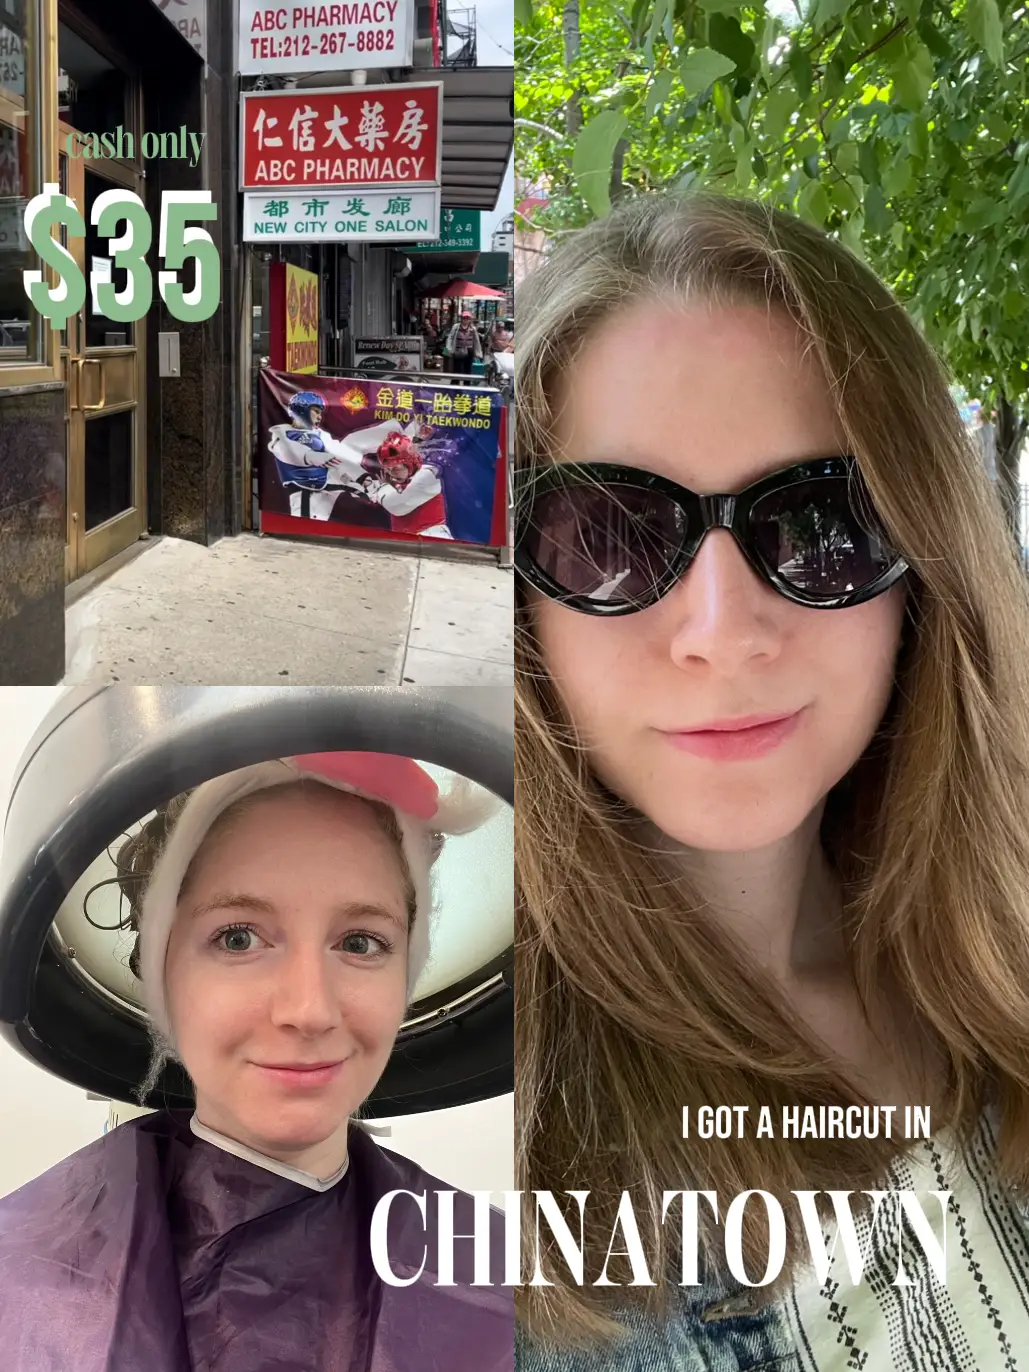 $35 haircut in Chinatown | NYC beauty on a budget's images